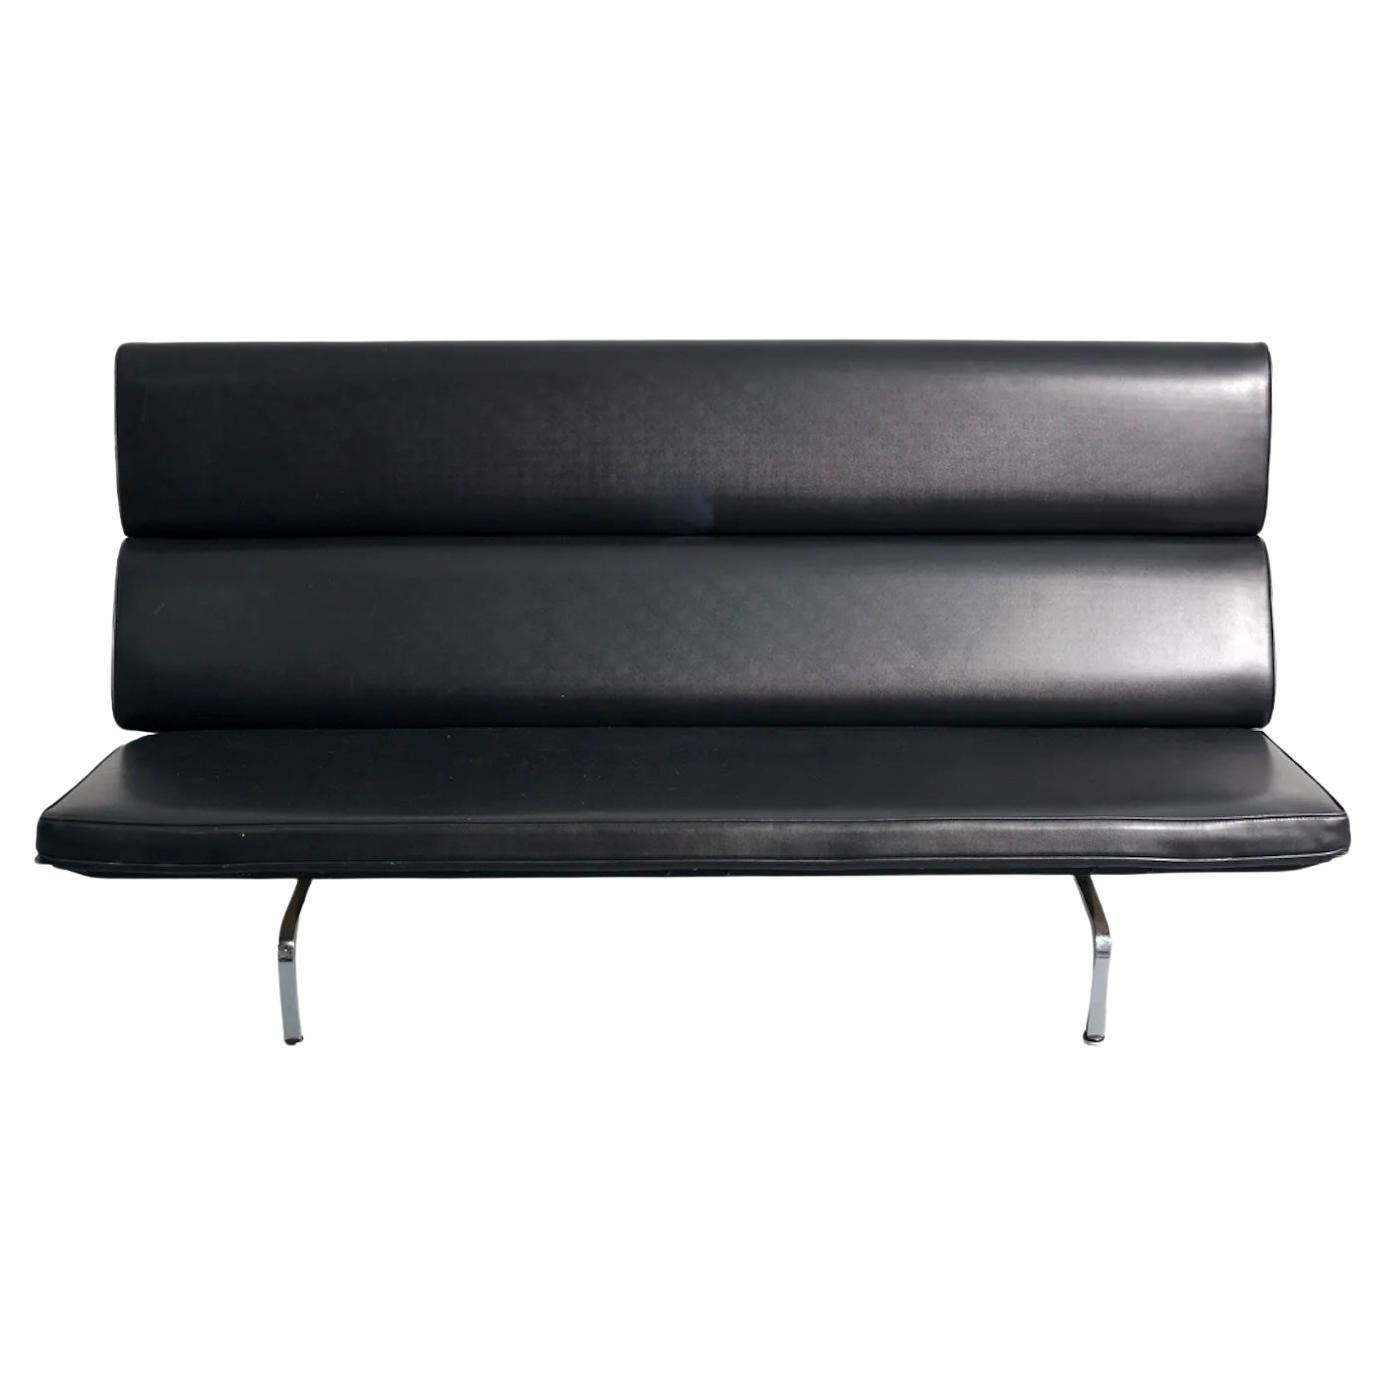 Original Eames sofa compact with original Black Leather upholstery. Charles and Ray Eames’ compact couch is great design that keeps a subtle profile. The cushioned pads that form the back are reinforced with cord welting and the seat cushions are